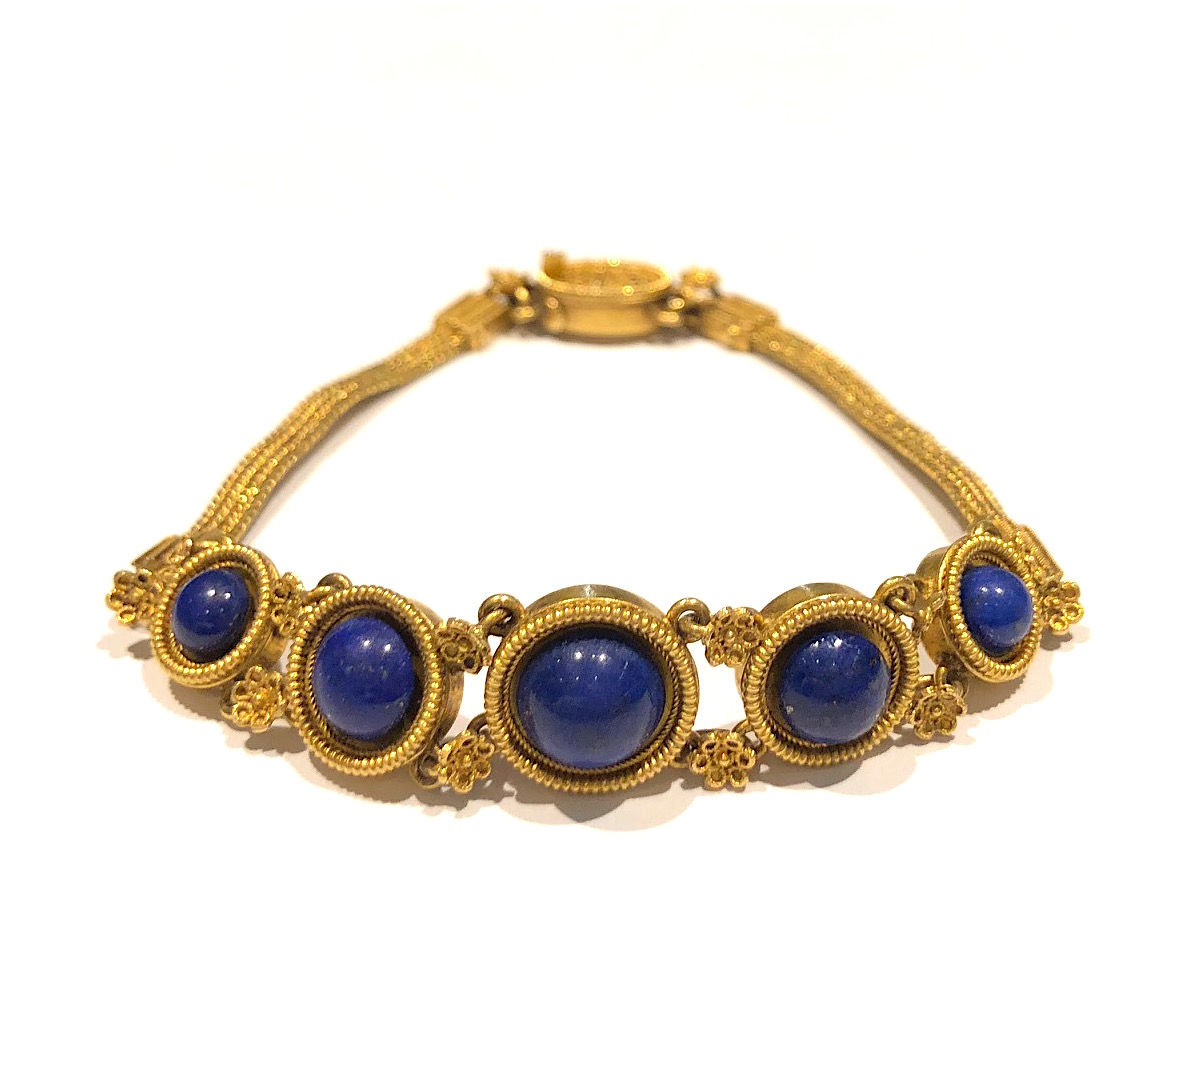 Giacinto Melillo (attr.) Etruscan / Egyptian Revival bracelet, finely woven three strand 18K gold braclelet set with very delicate floral rosettes throughout with fine wire work and gold granulation and further set with 5 round cabochons of gem quality lapis lazuli, c.1875